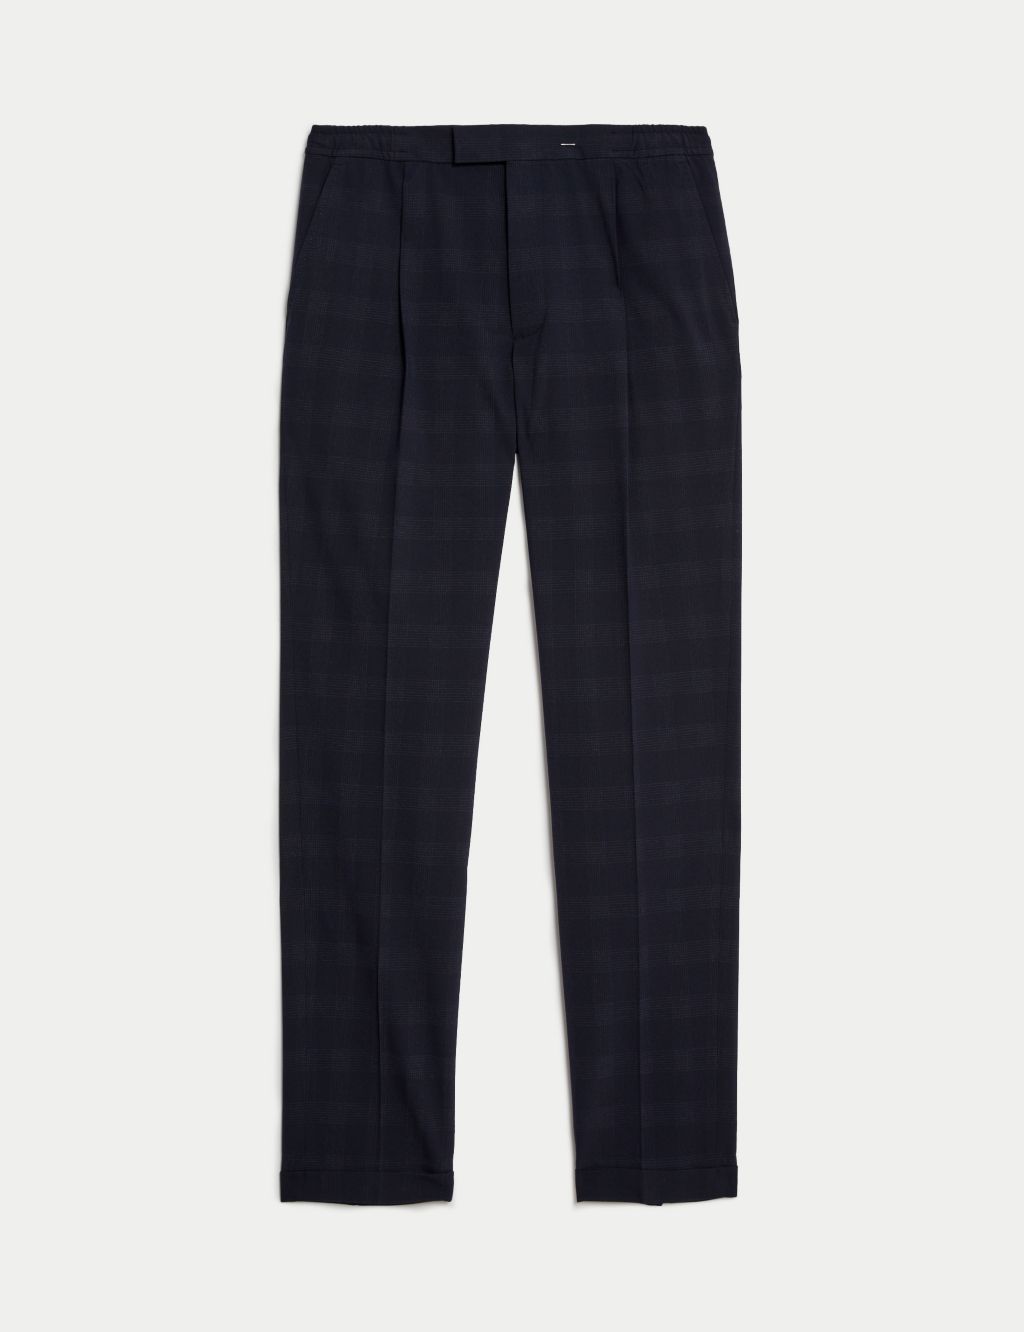 Check Single Pleat Elasticated Trousers image 8